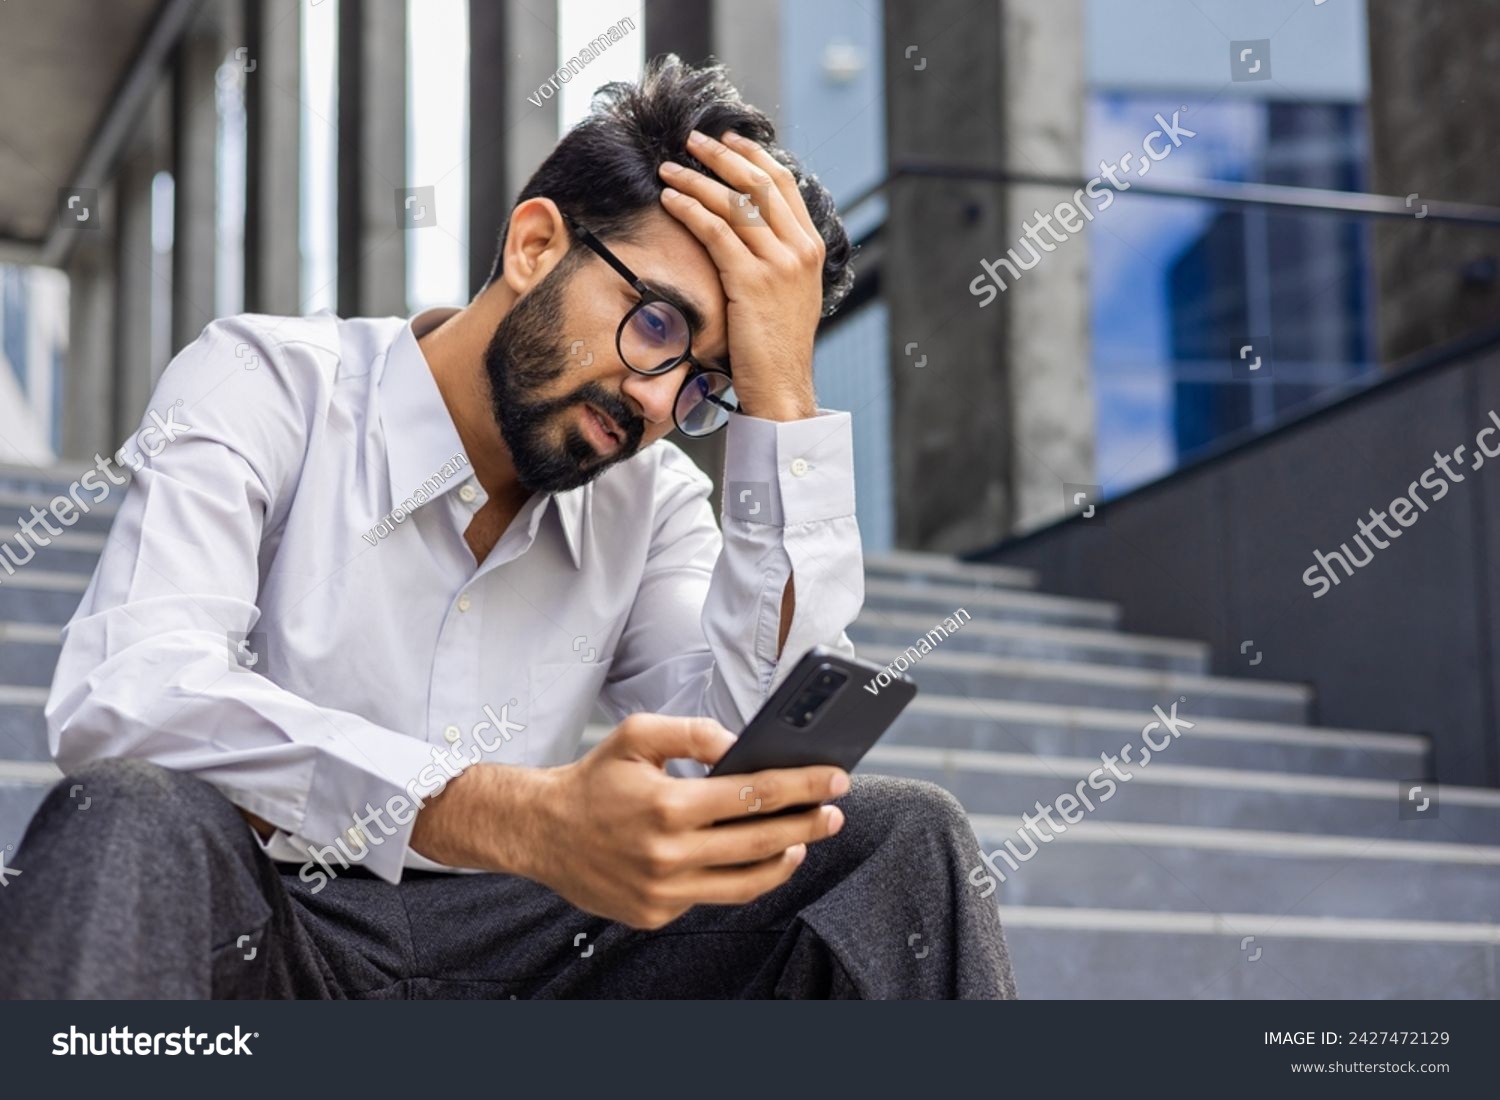 Young man depressed, sad dissatisfied and unhappy outside office building, holding phone, reading bad news from smartphone, businessman in shirt after work. #2427472129